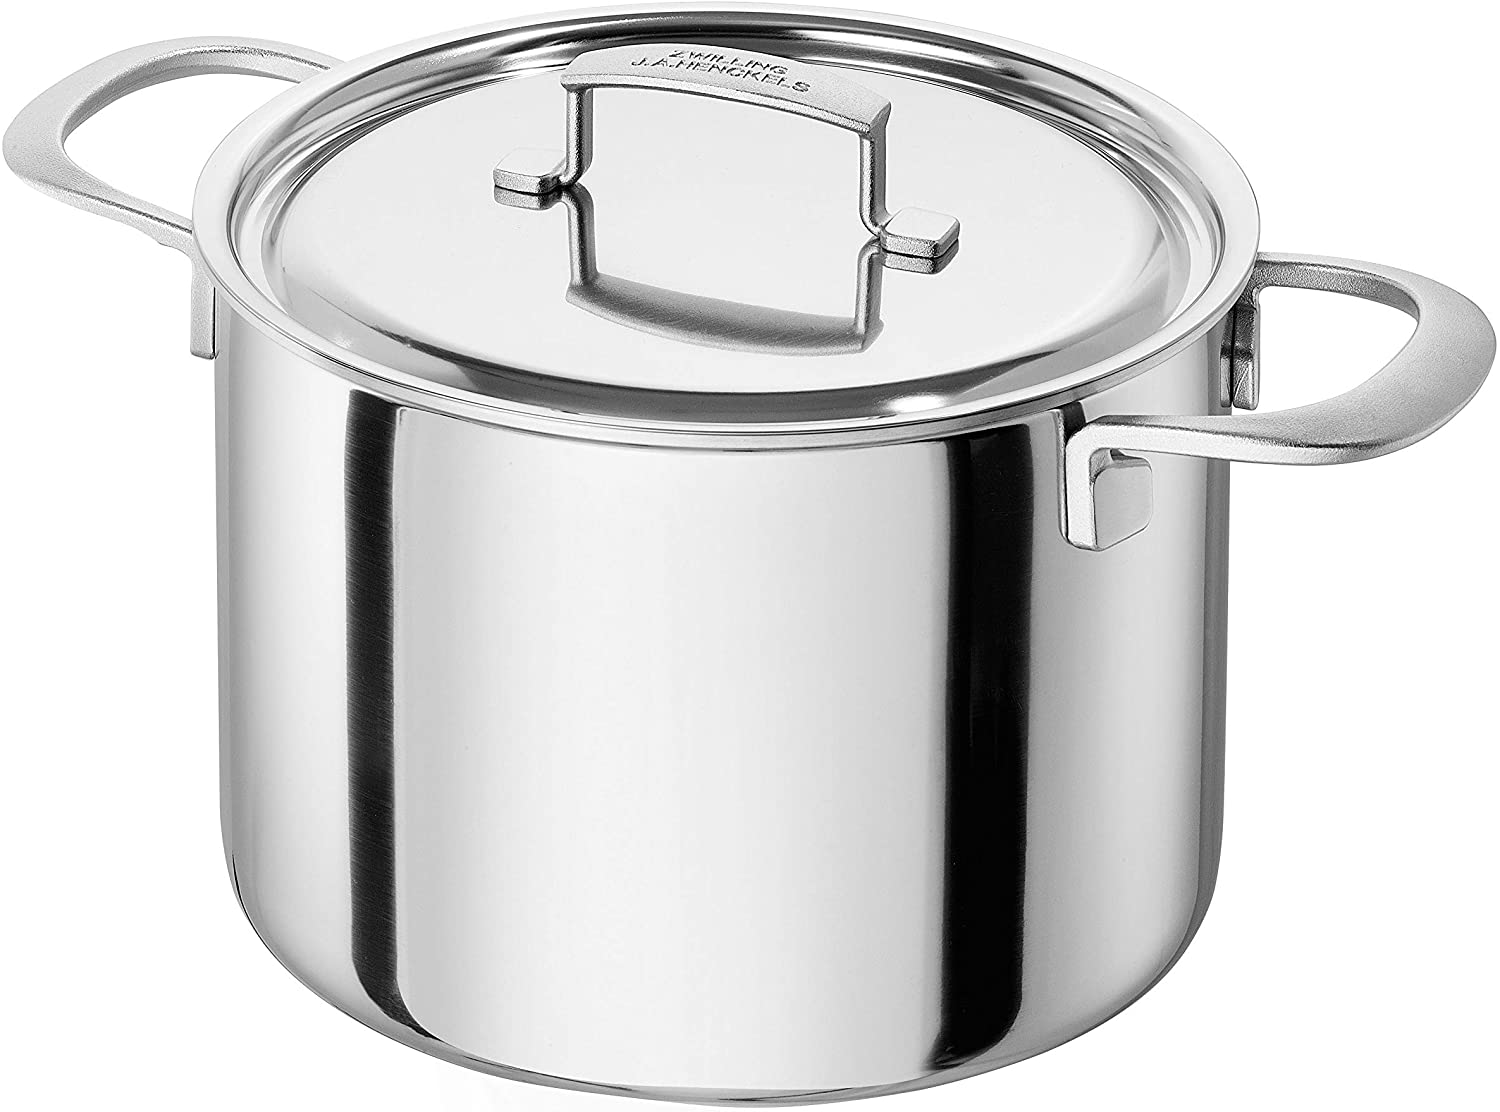 Zwilling Sensation 66003-240-0 Stewing Pan 7.6 L Suitable for Induction Cookers